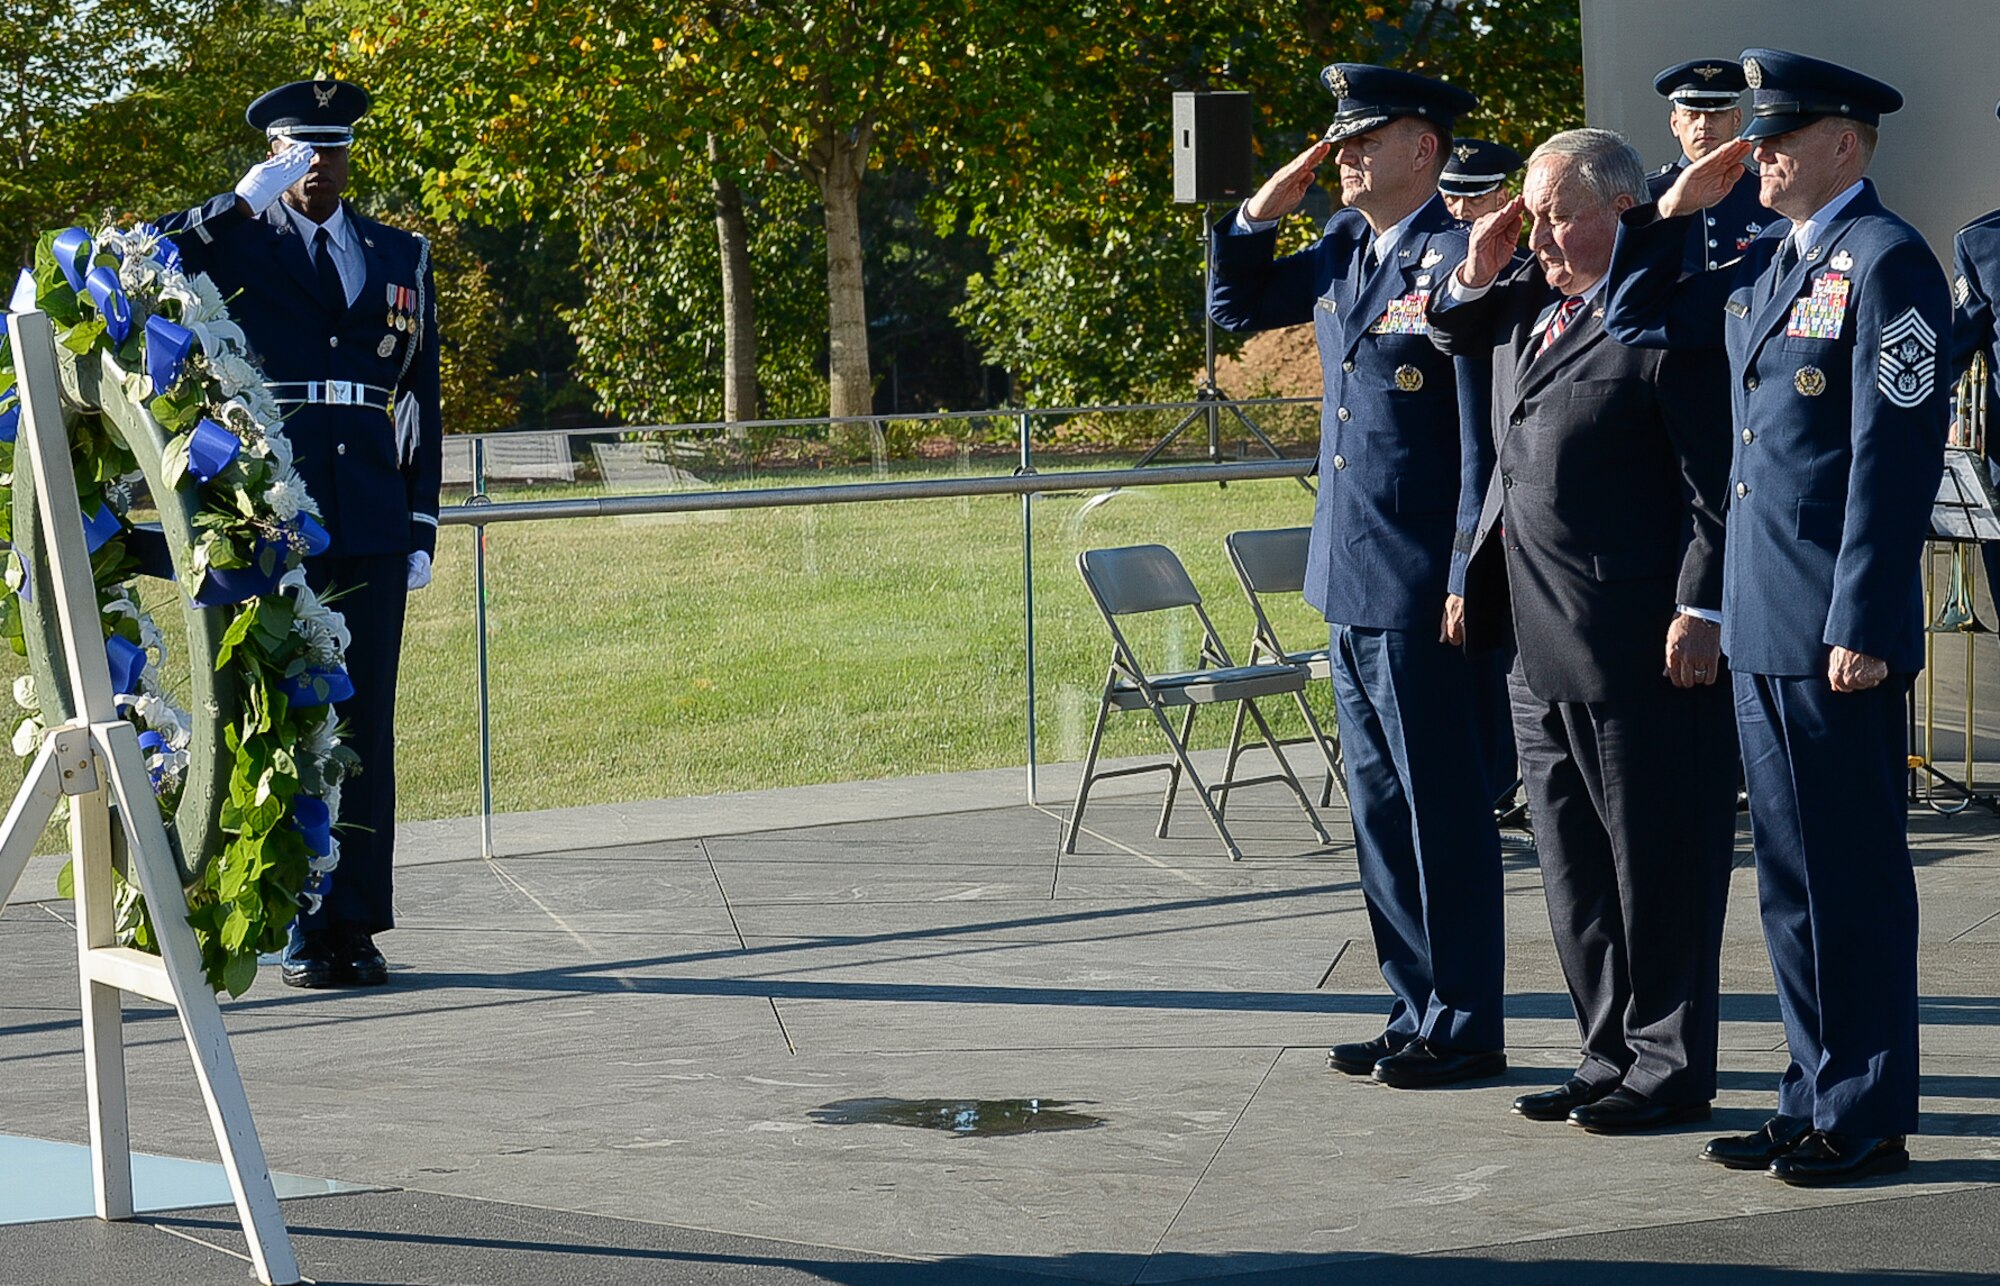 Air Force Assistant Vice Chief of Staff Lt. Gen. Stephen Hoog (left),  Air Force Association Chairman of the Board Mr. George Muellner and Chief Master Sergeant of the Air Force James Cody render honors after laying a wreath during a memorial service Sept. 15, 2013, at the Air Force Memorial, Arlington, Va. The Air Force's 12 Outstanding Airmen of the Year, Air Force Senior Leaders and Air Force Association members were on hand for the early morning service. (U.S. Air Force photo/Jim Varhegyi)